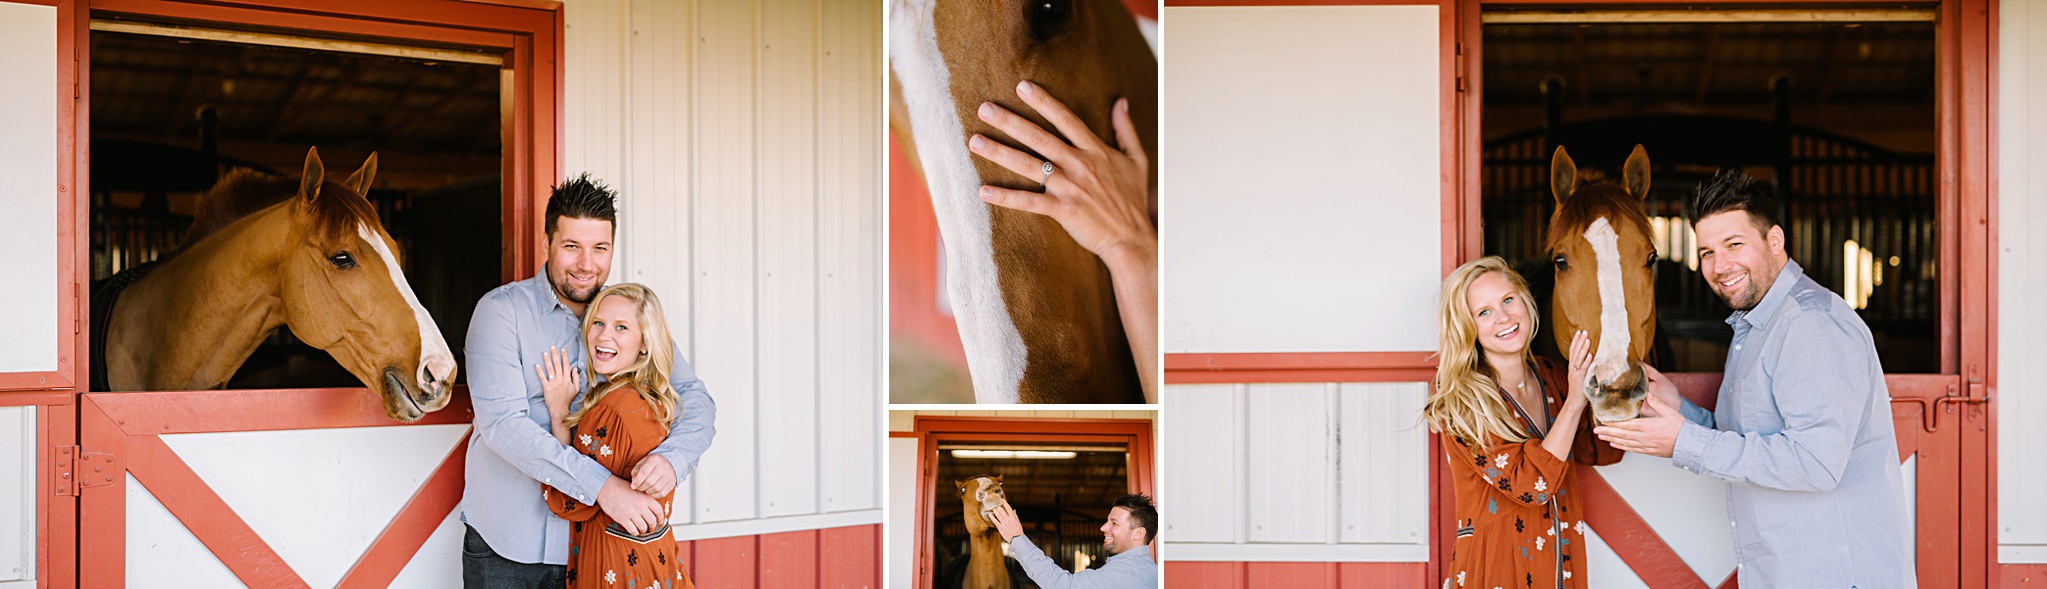 engagement-session-with-horses